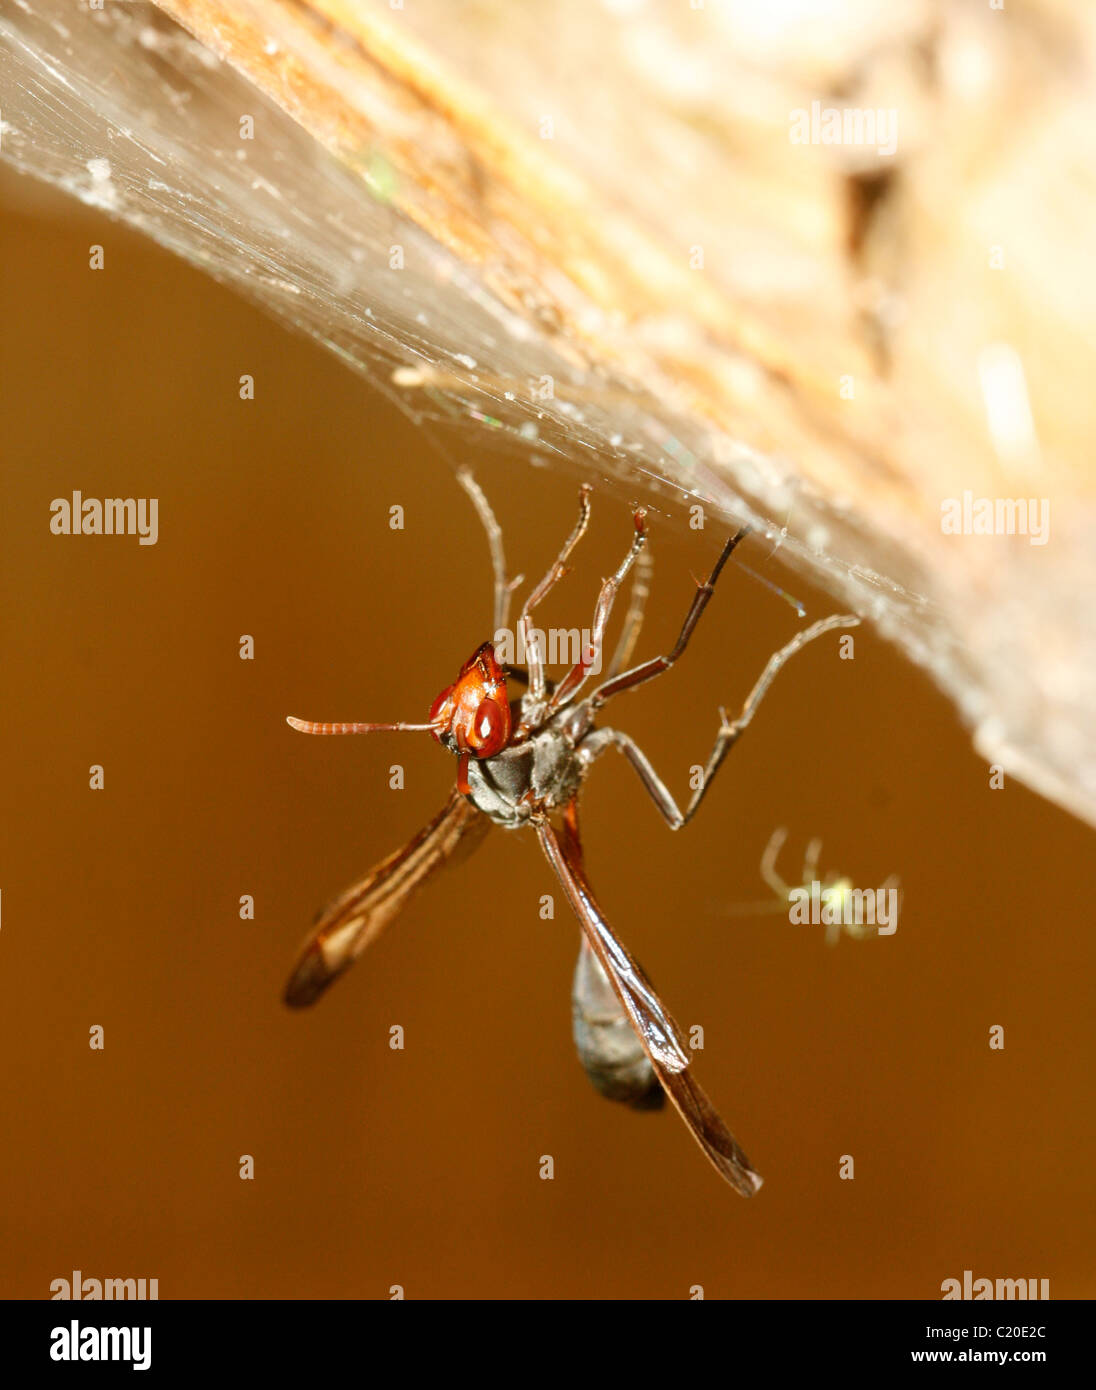 A wasp is stuck in a spider web as the spider approaches from behind Stock Photo